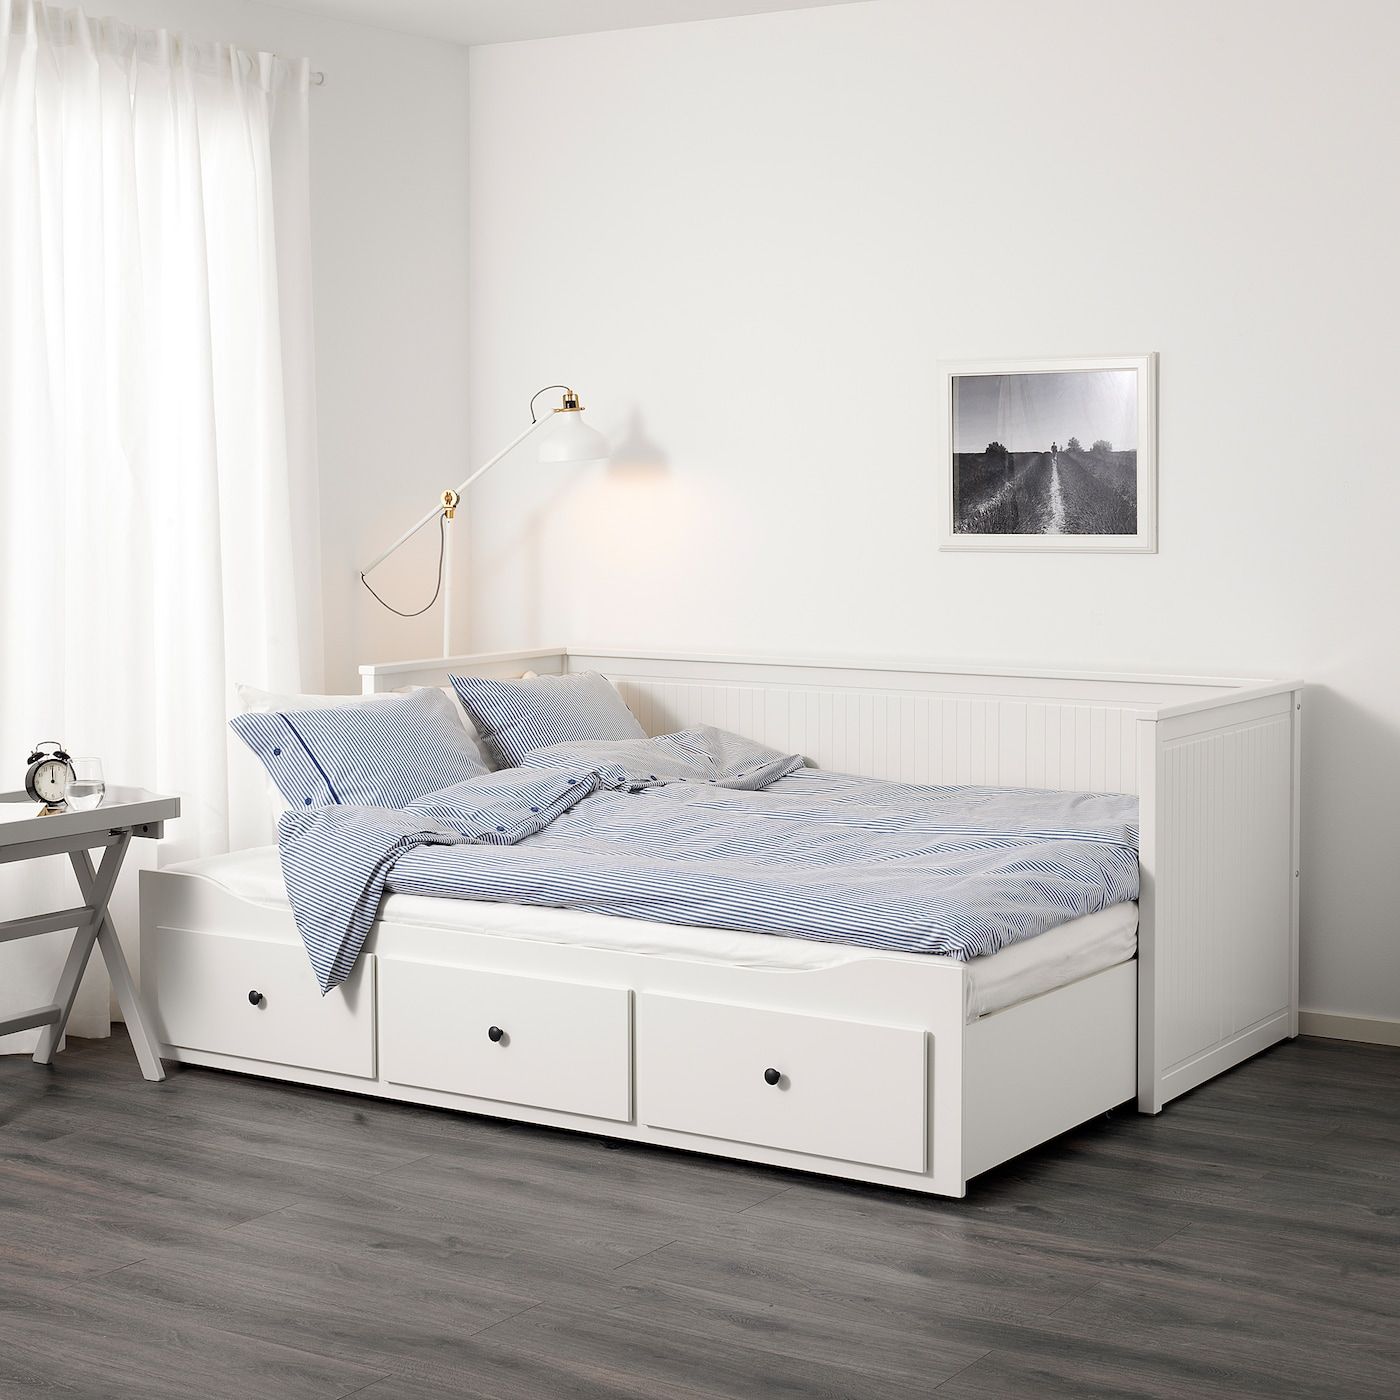 Style Your Bedroom With Affordable Beds At Ikea Houston Chron Shopping